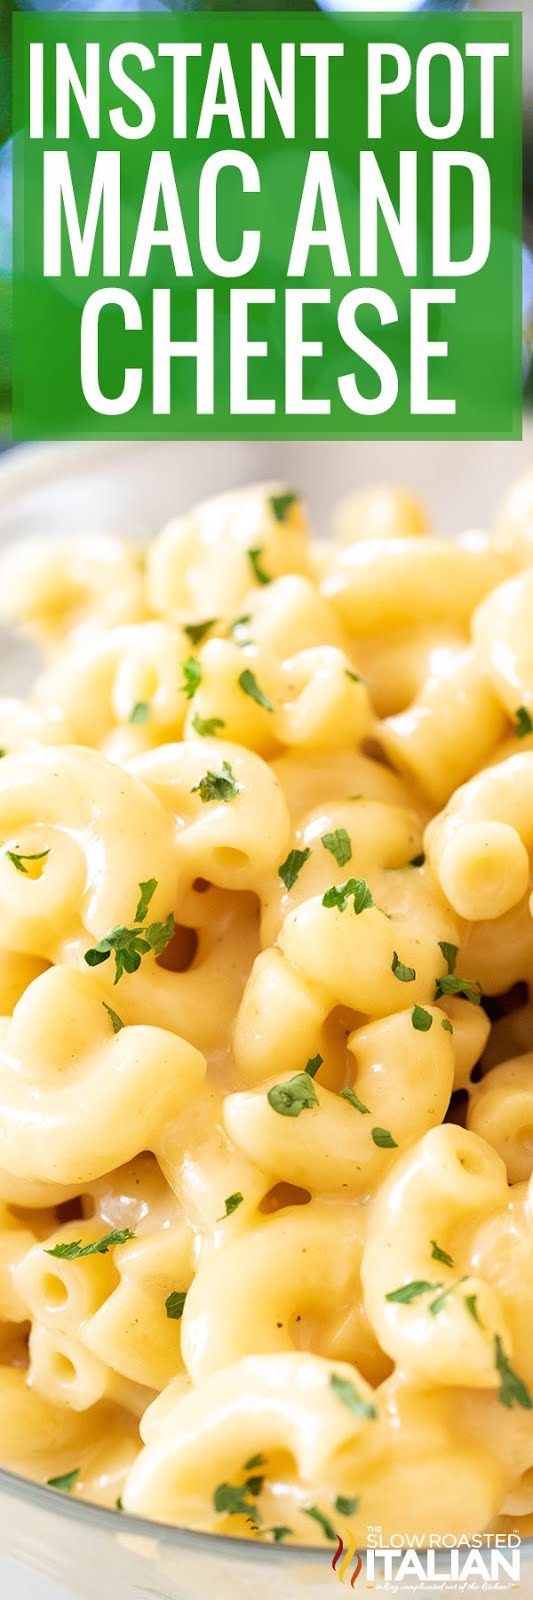 instant pot mac and cheese -pin